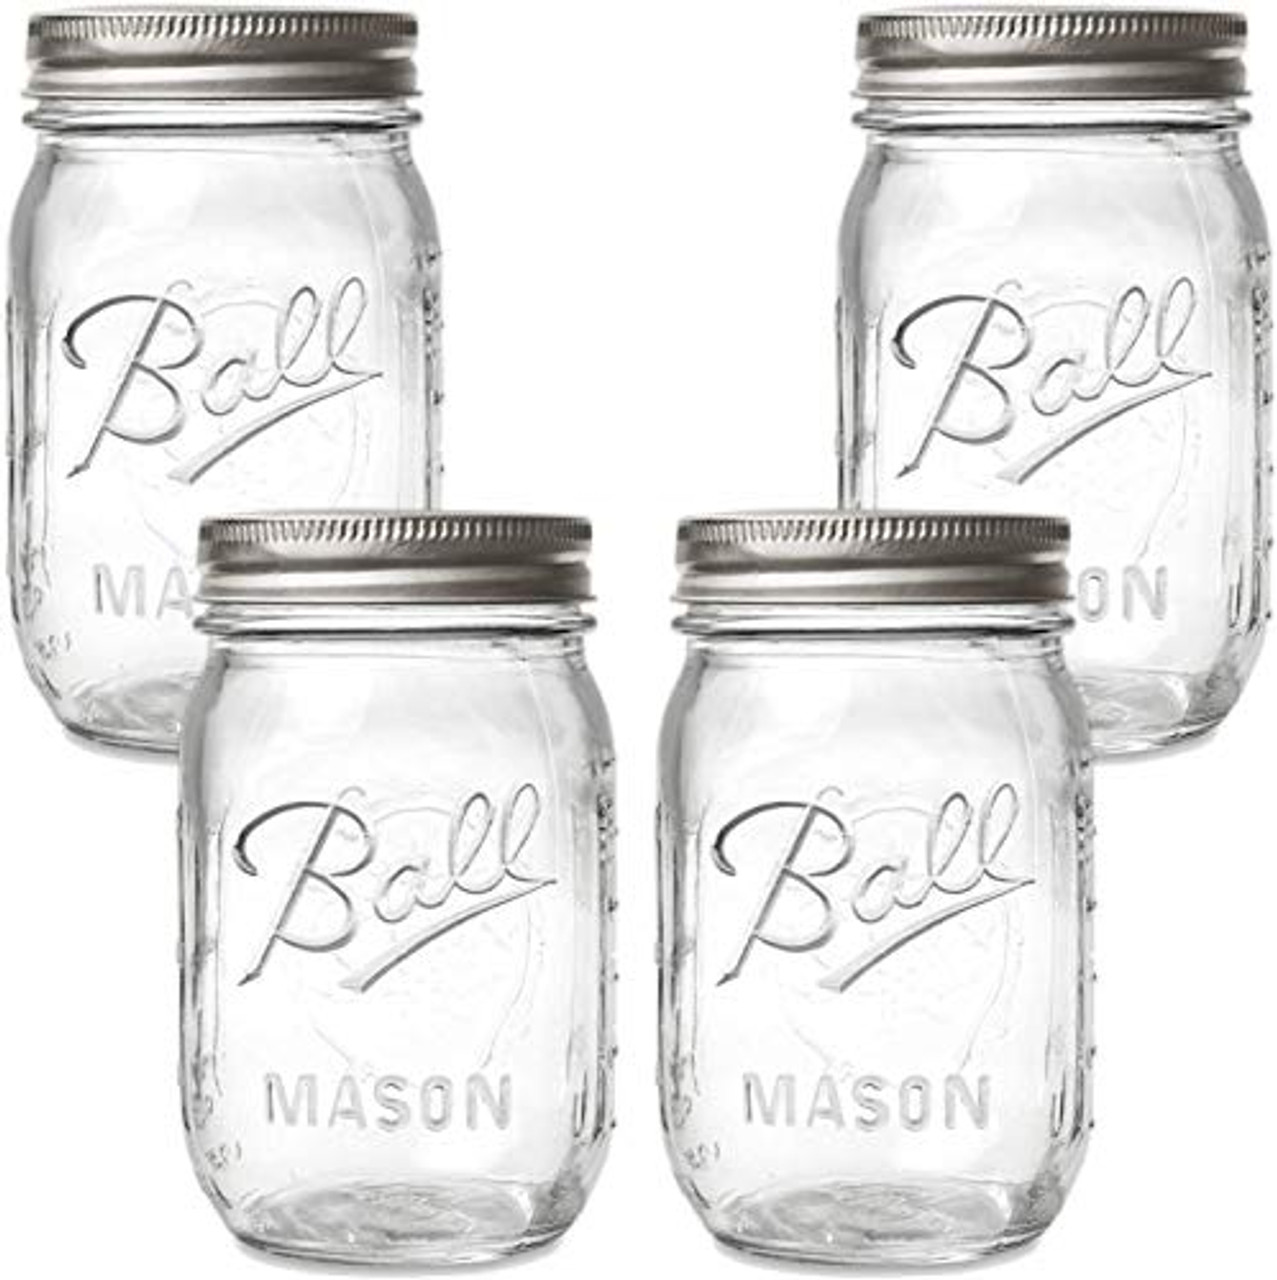 Wide Mouth Mason Jars 24 oz - (2 Pack) - Ball Wide Mouth 24-Ounces Pint and  a Half Mason Jars With Airtight lids and Bands - Clear Glass Mason Jars